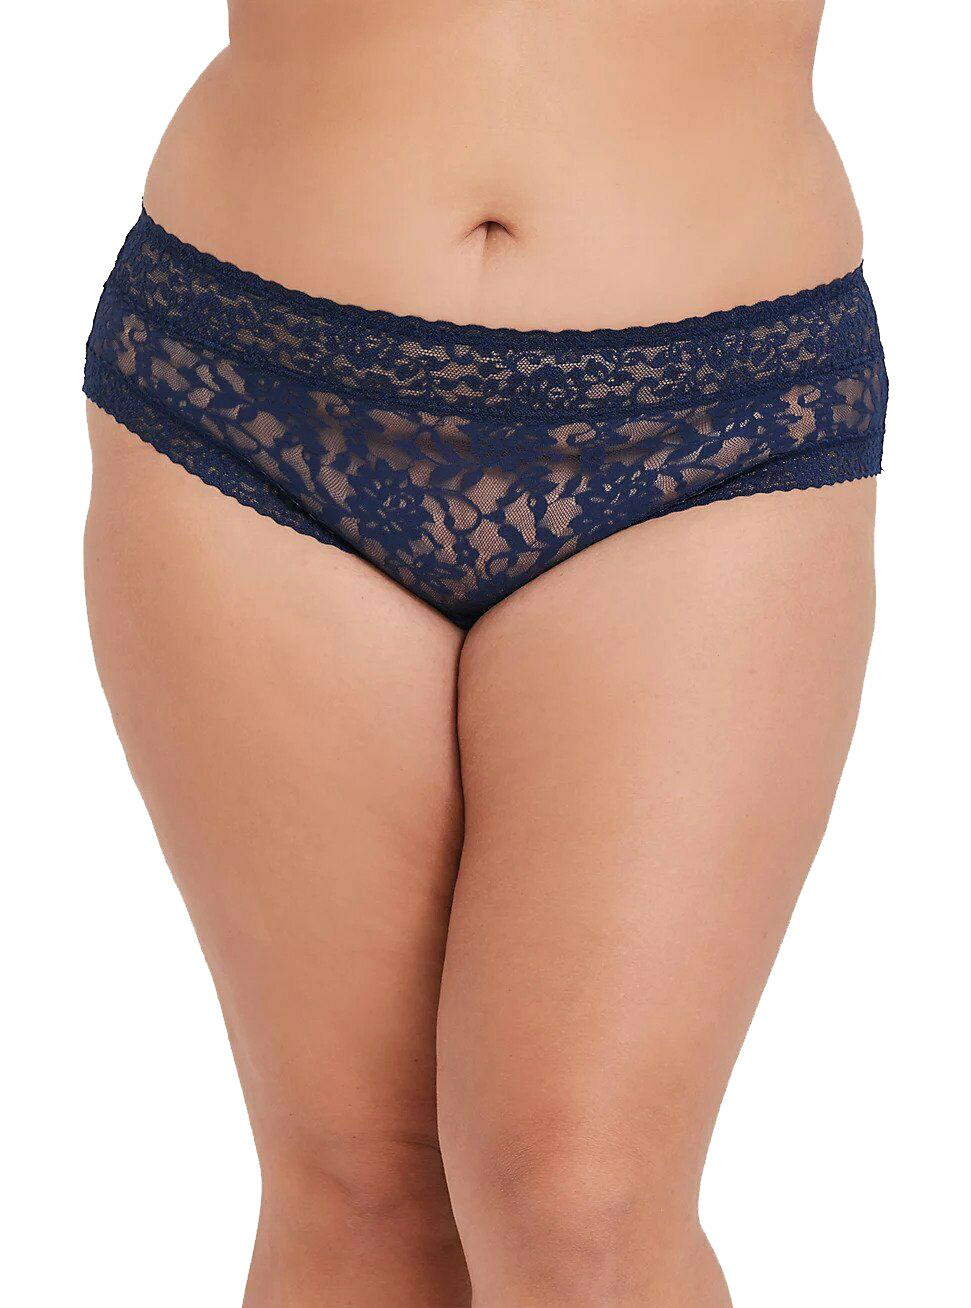 French Daina 4XL-5XL Signature Lace Hipster panty